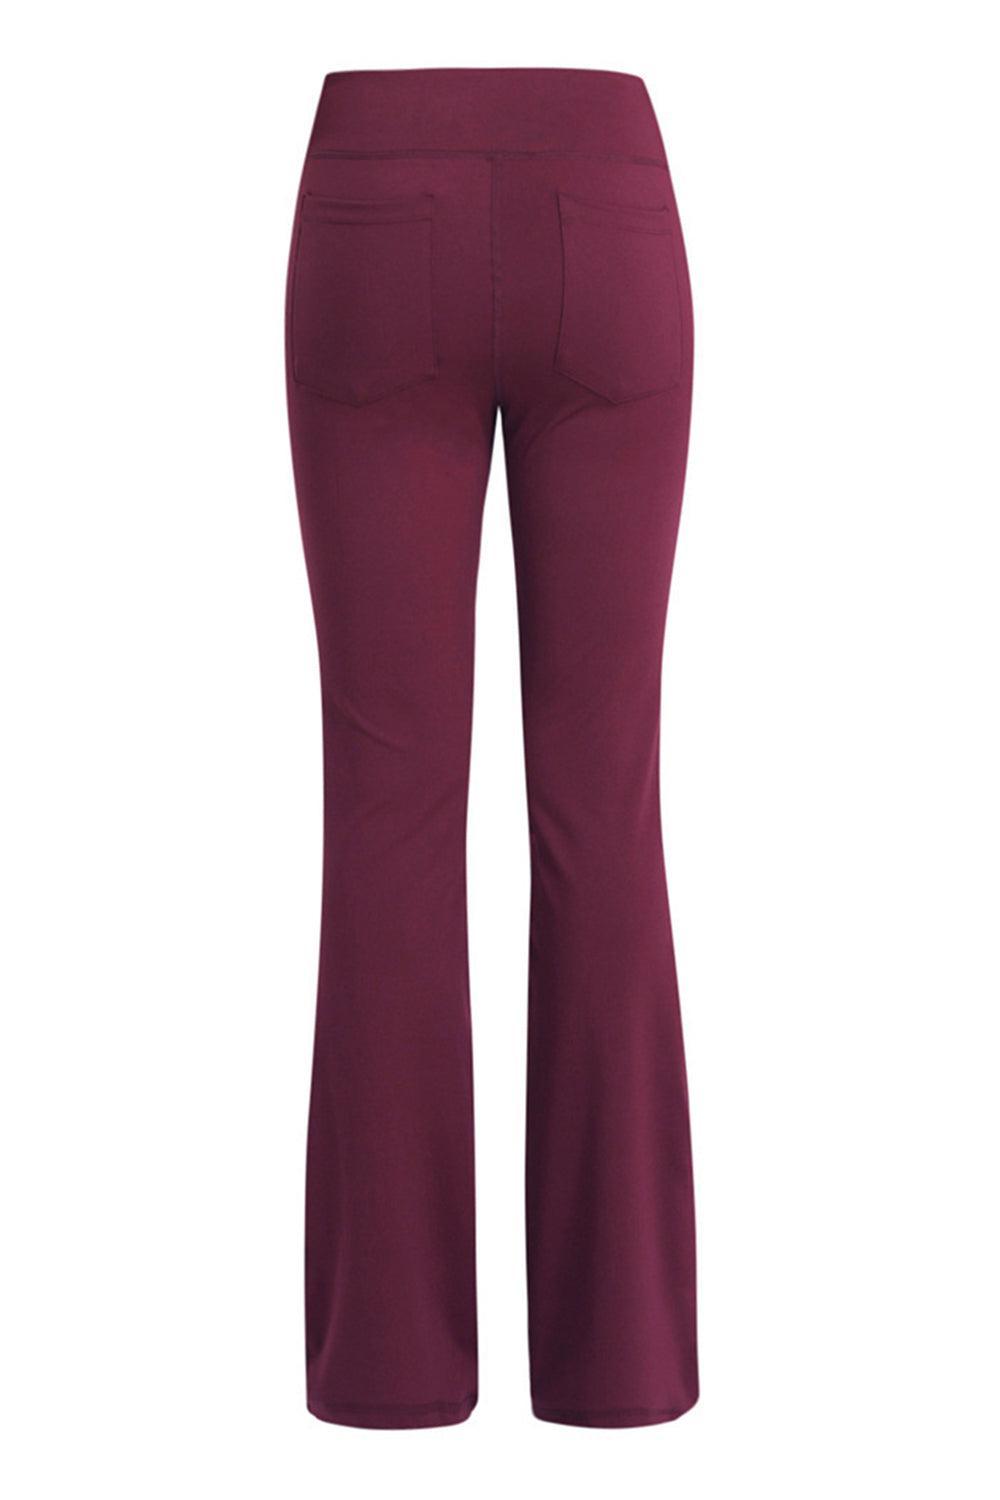 a woman wearing a maroon pants and heels